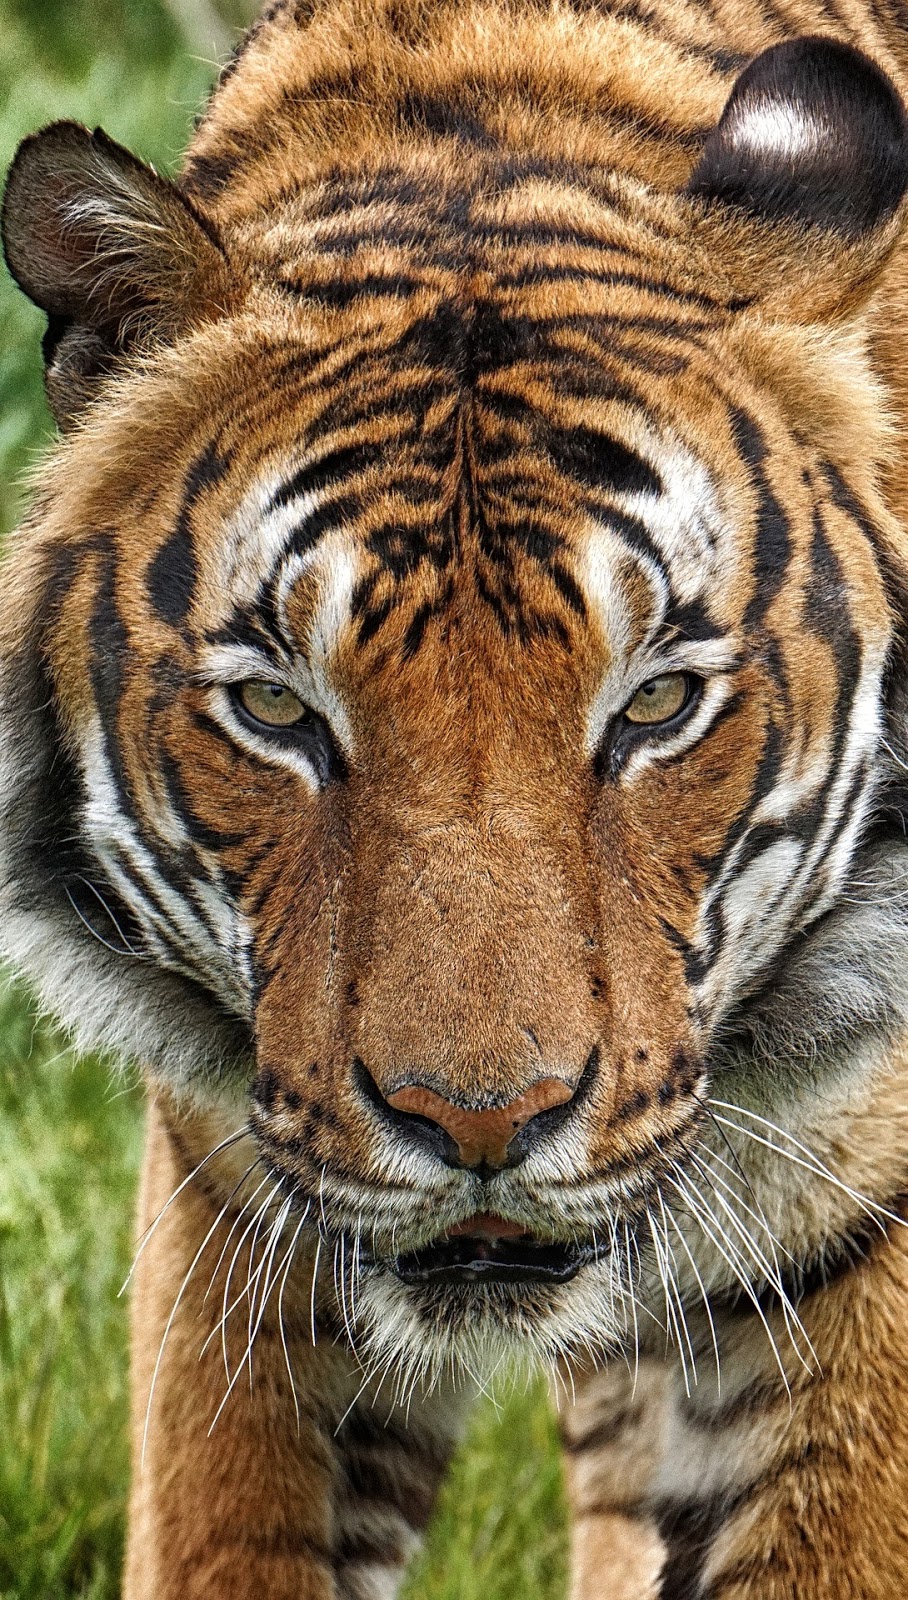 Face of a tiger.